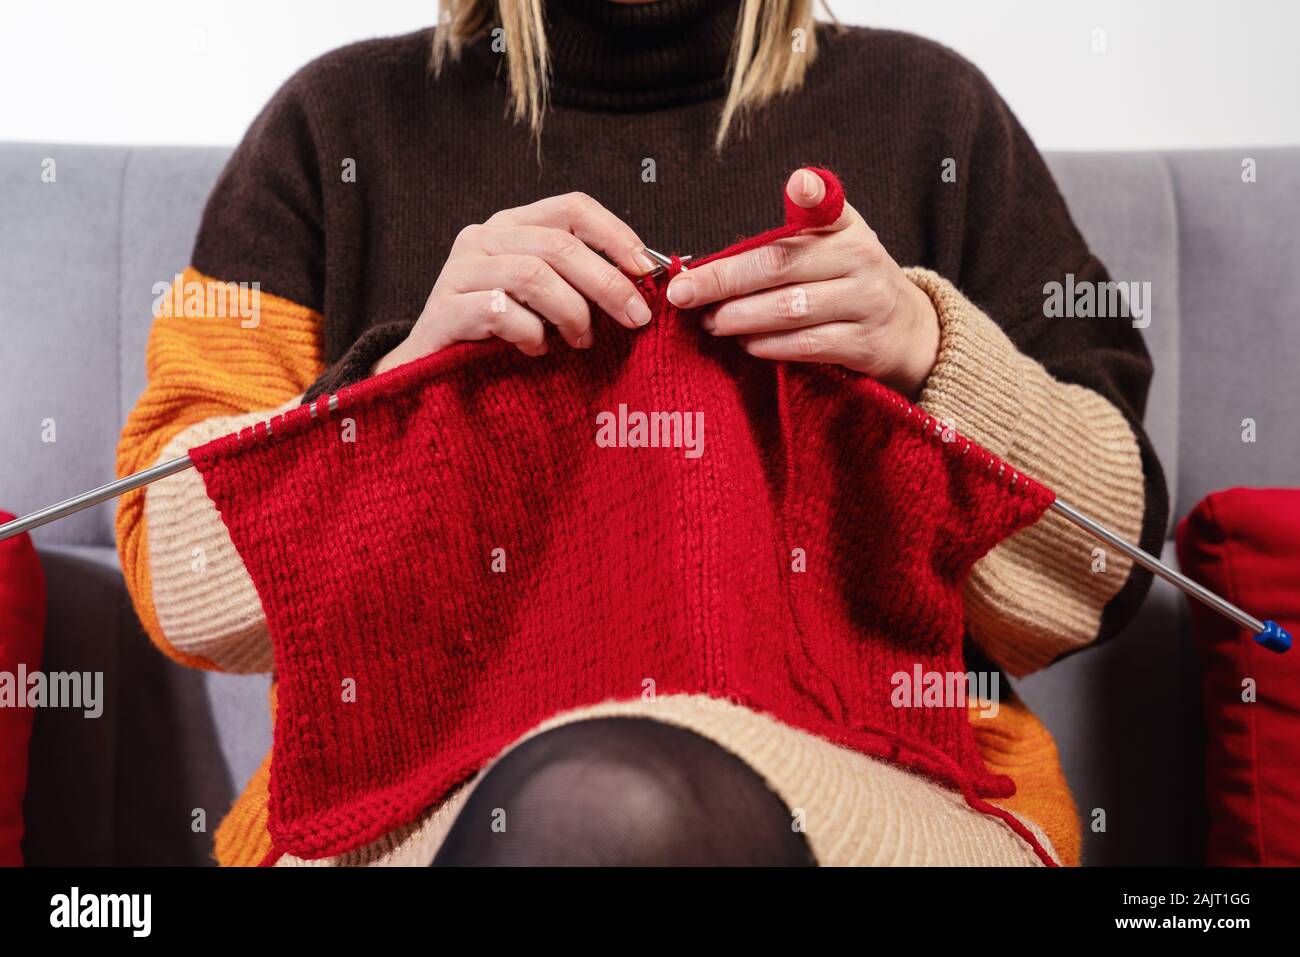 Handwork concept, young woman is knitting a needlework. Stock Photo